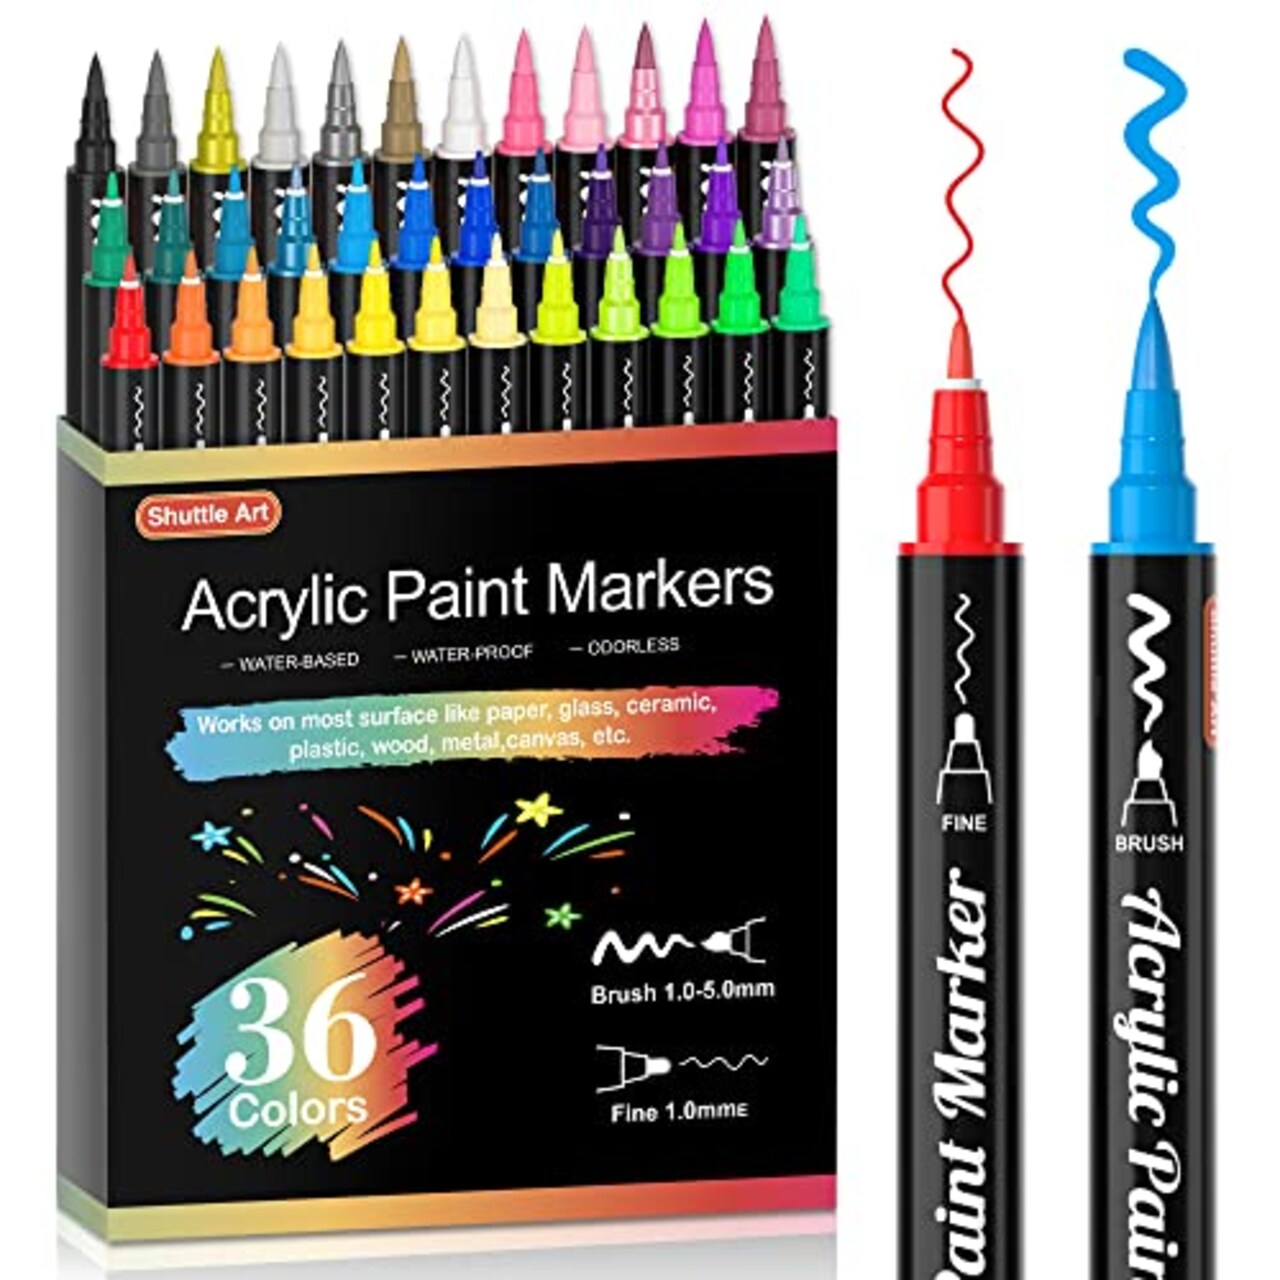 Shuttle Art 36 Colors Dual Tip Acrylic Paint Markers, Brush Tip and Fine  Tip Acrylic Paint Pens for Rock Painting, Ceramic, Wood, Canvas, Plastic,  Glass, Stone, Calligraphy, Card Making, DIY Crafts